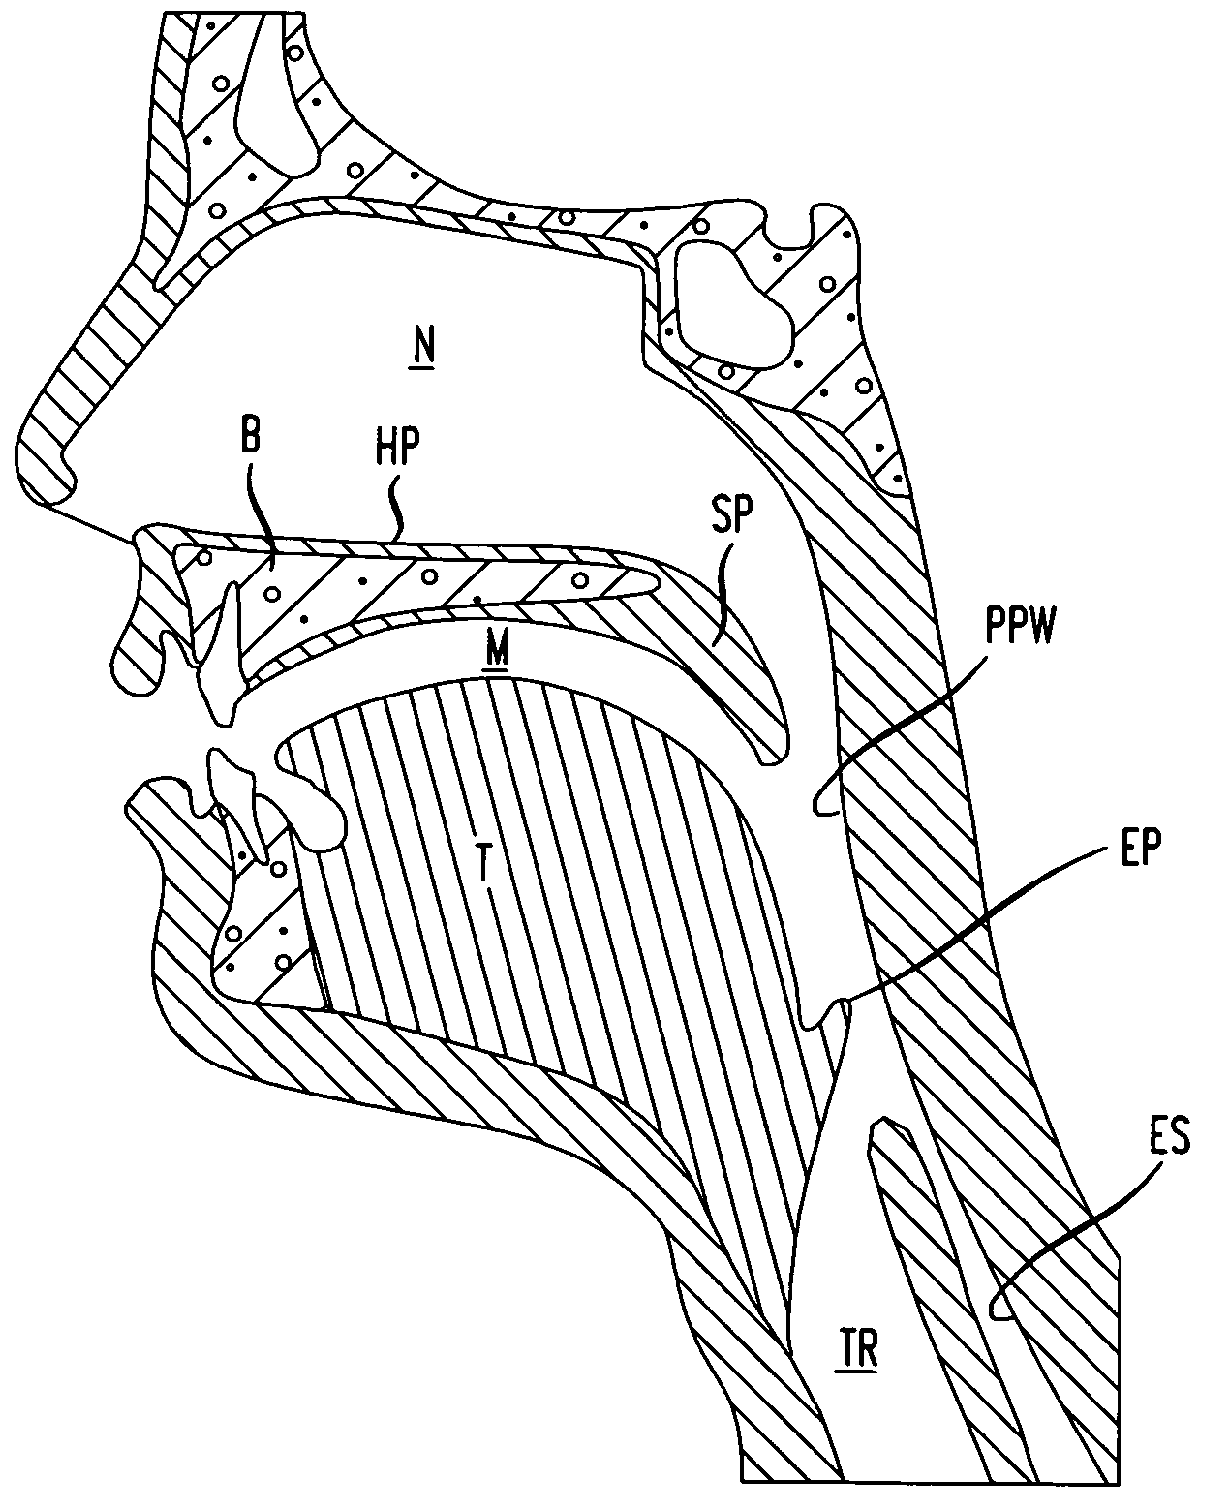 Methods and devices for treatment of obstructive sleep apnea